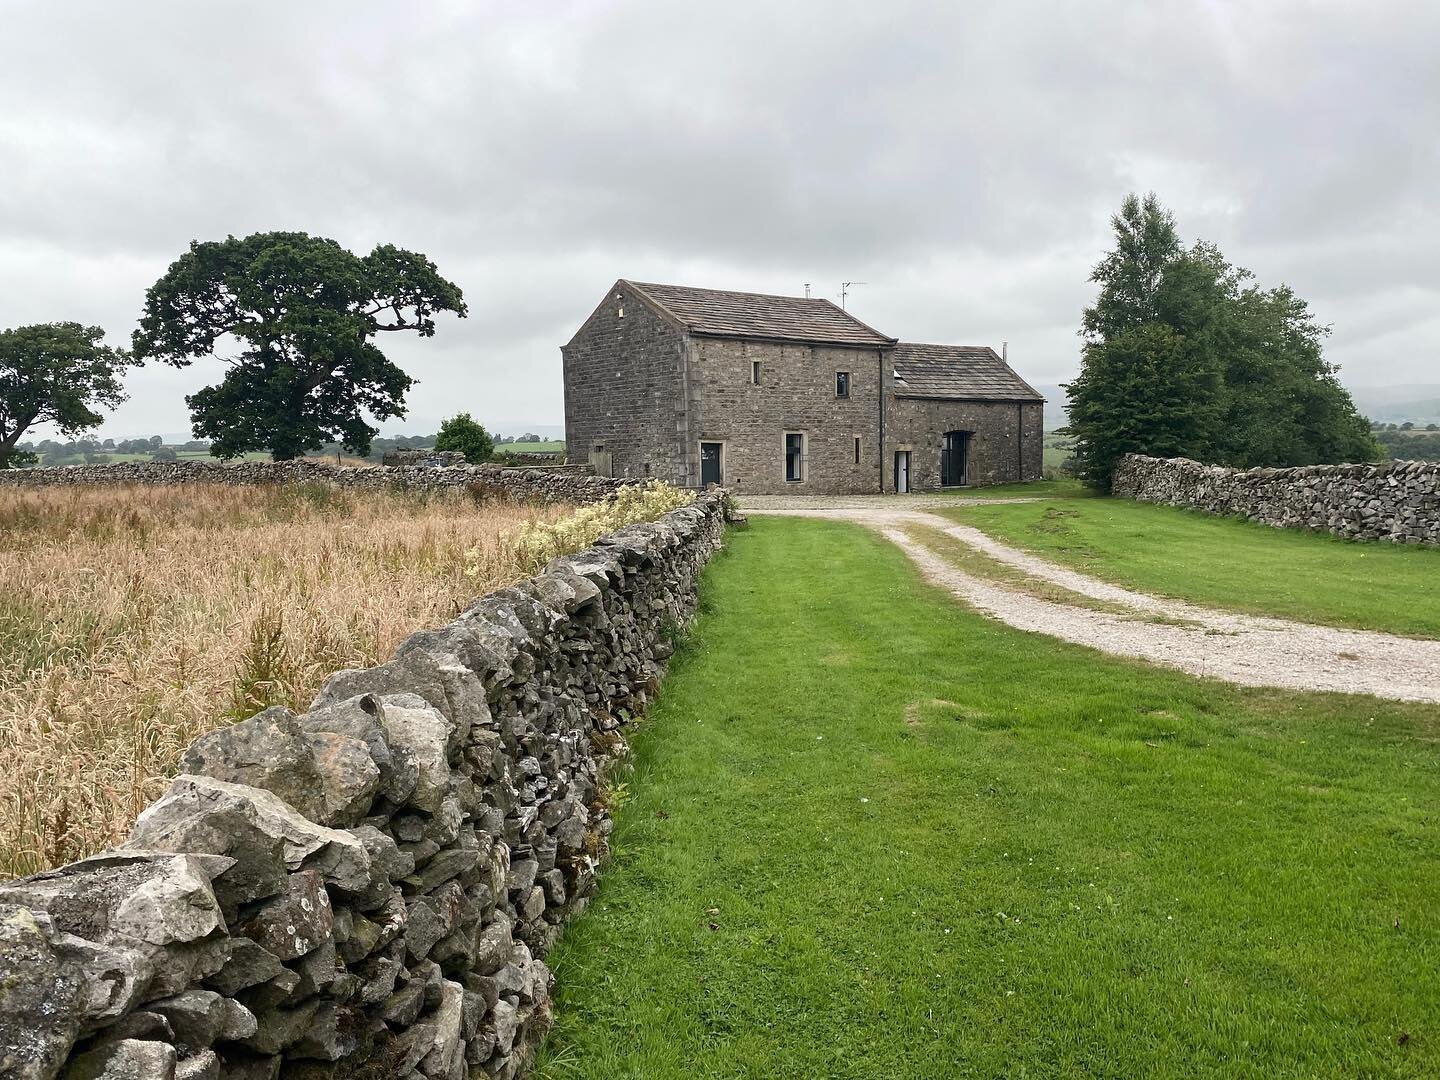 Excited to start work on a lovely project in Yorkshire. Two, adjoining, three-hundred-year-old stone barns stand on the edge of the Dales, with outstanding views across the Three Peaks. A sensitive, contextual, sustainable retrofit is planned. #retro